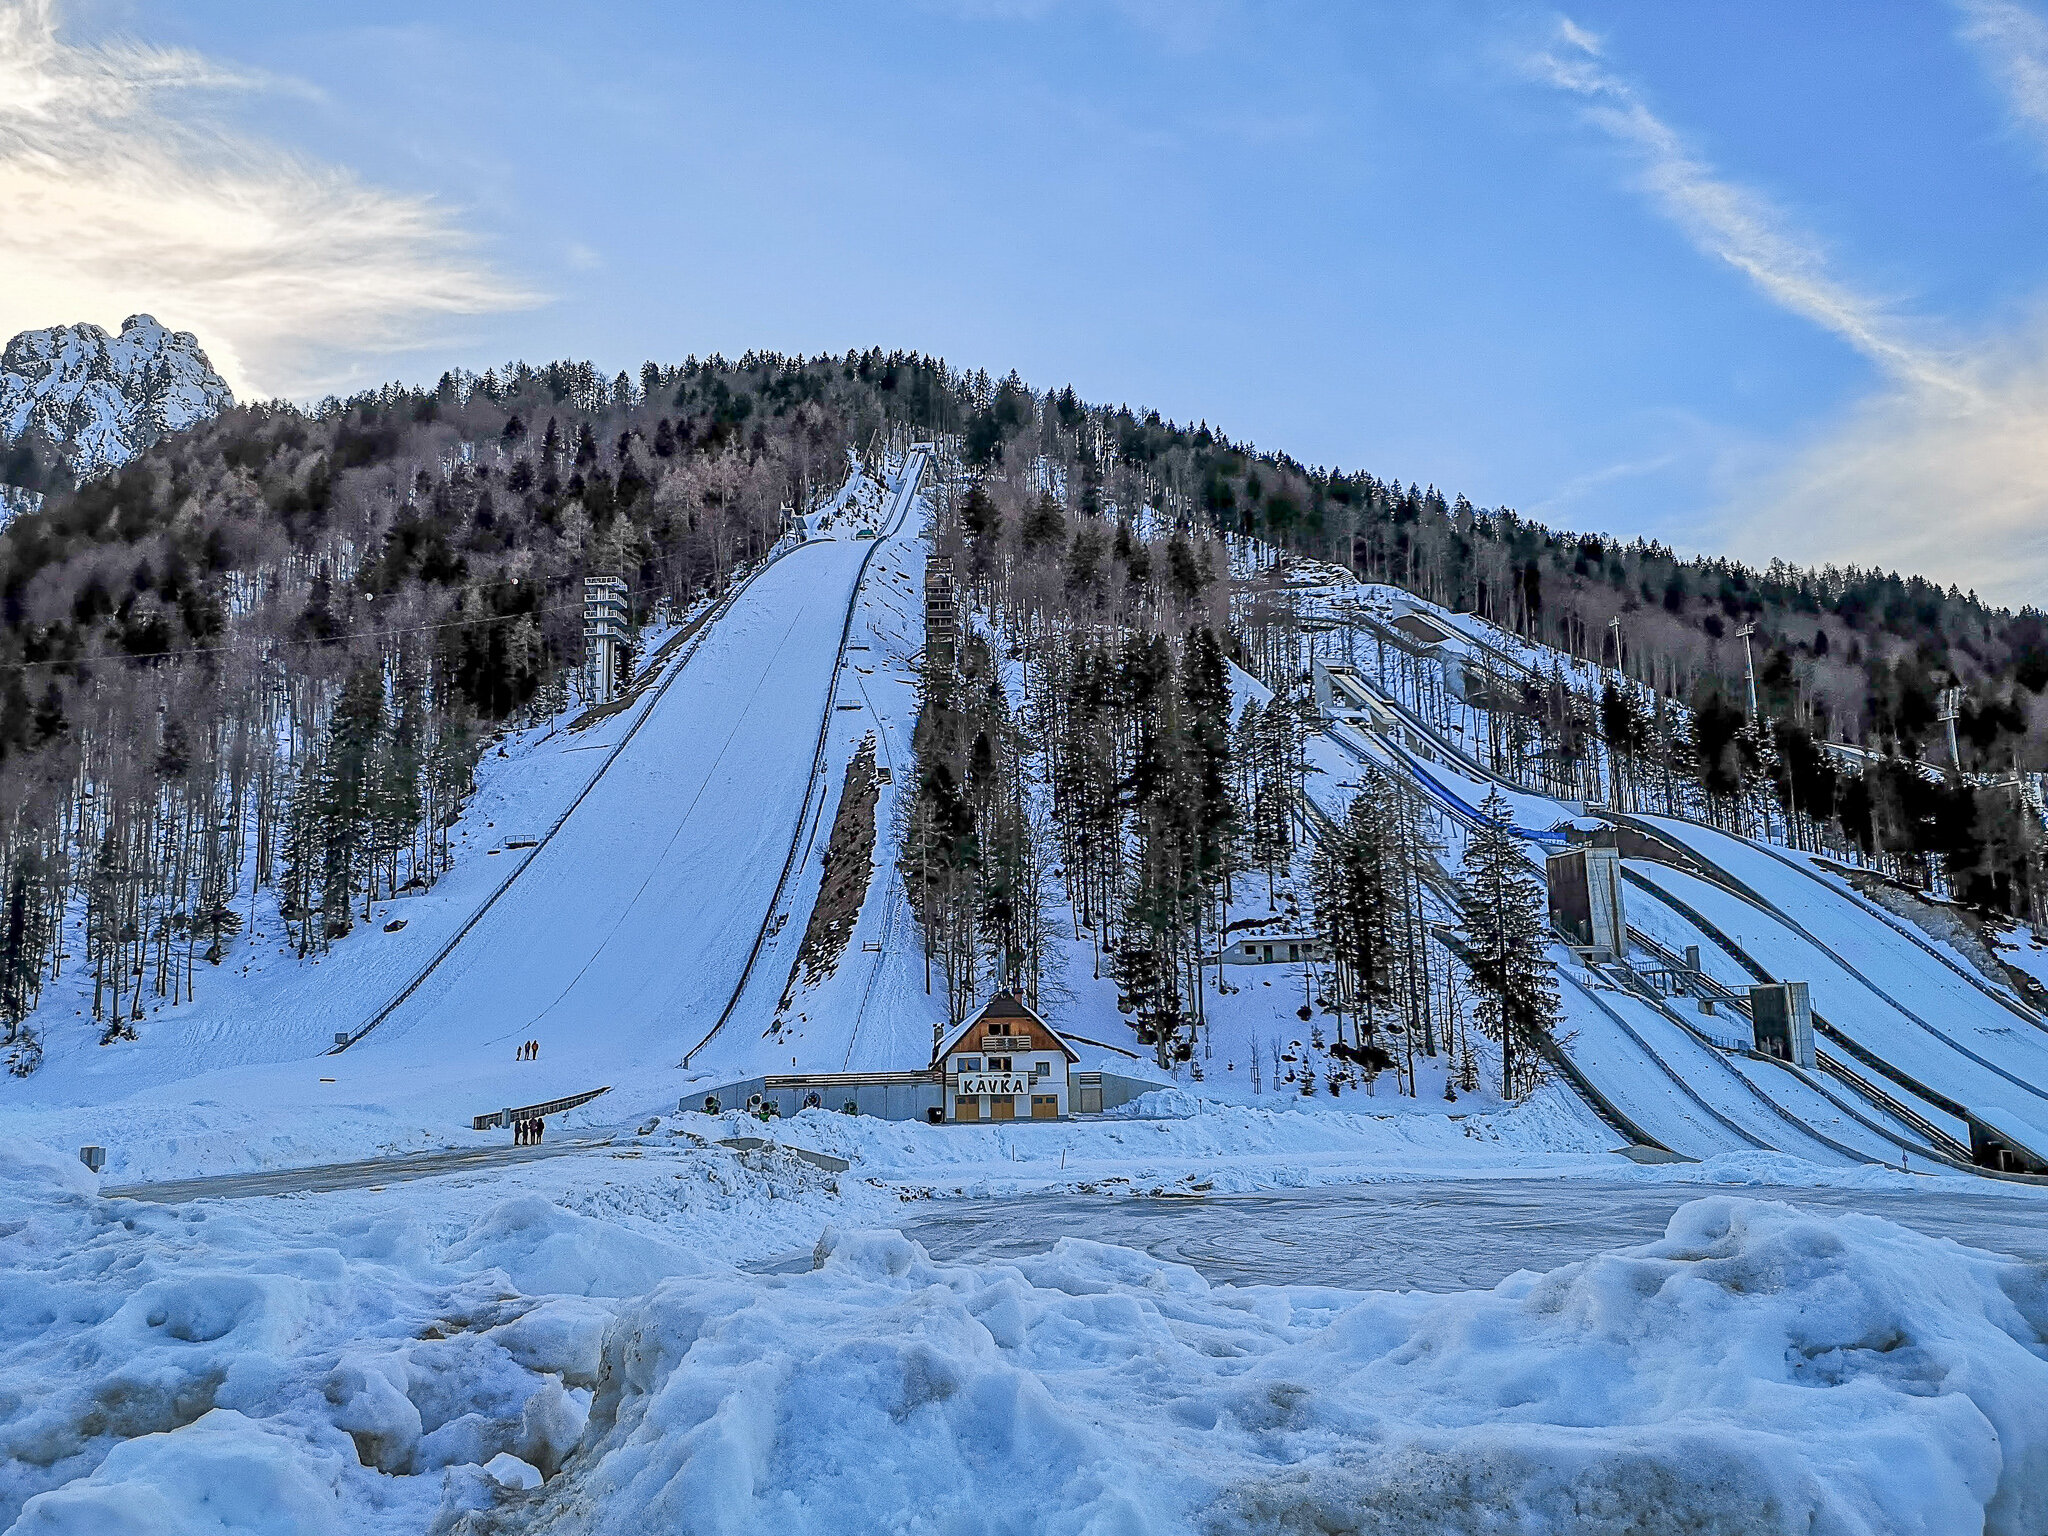  Planica - 2nd largest ski jump in the world 